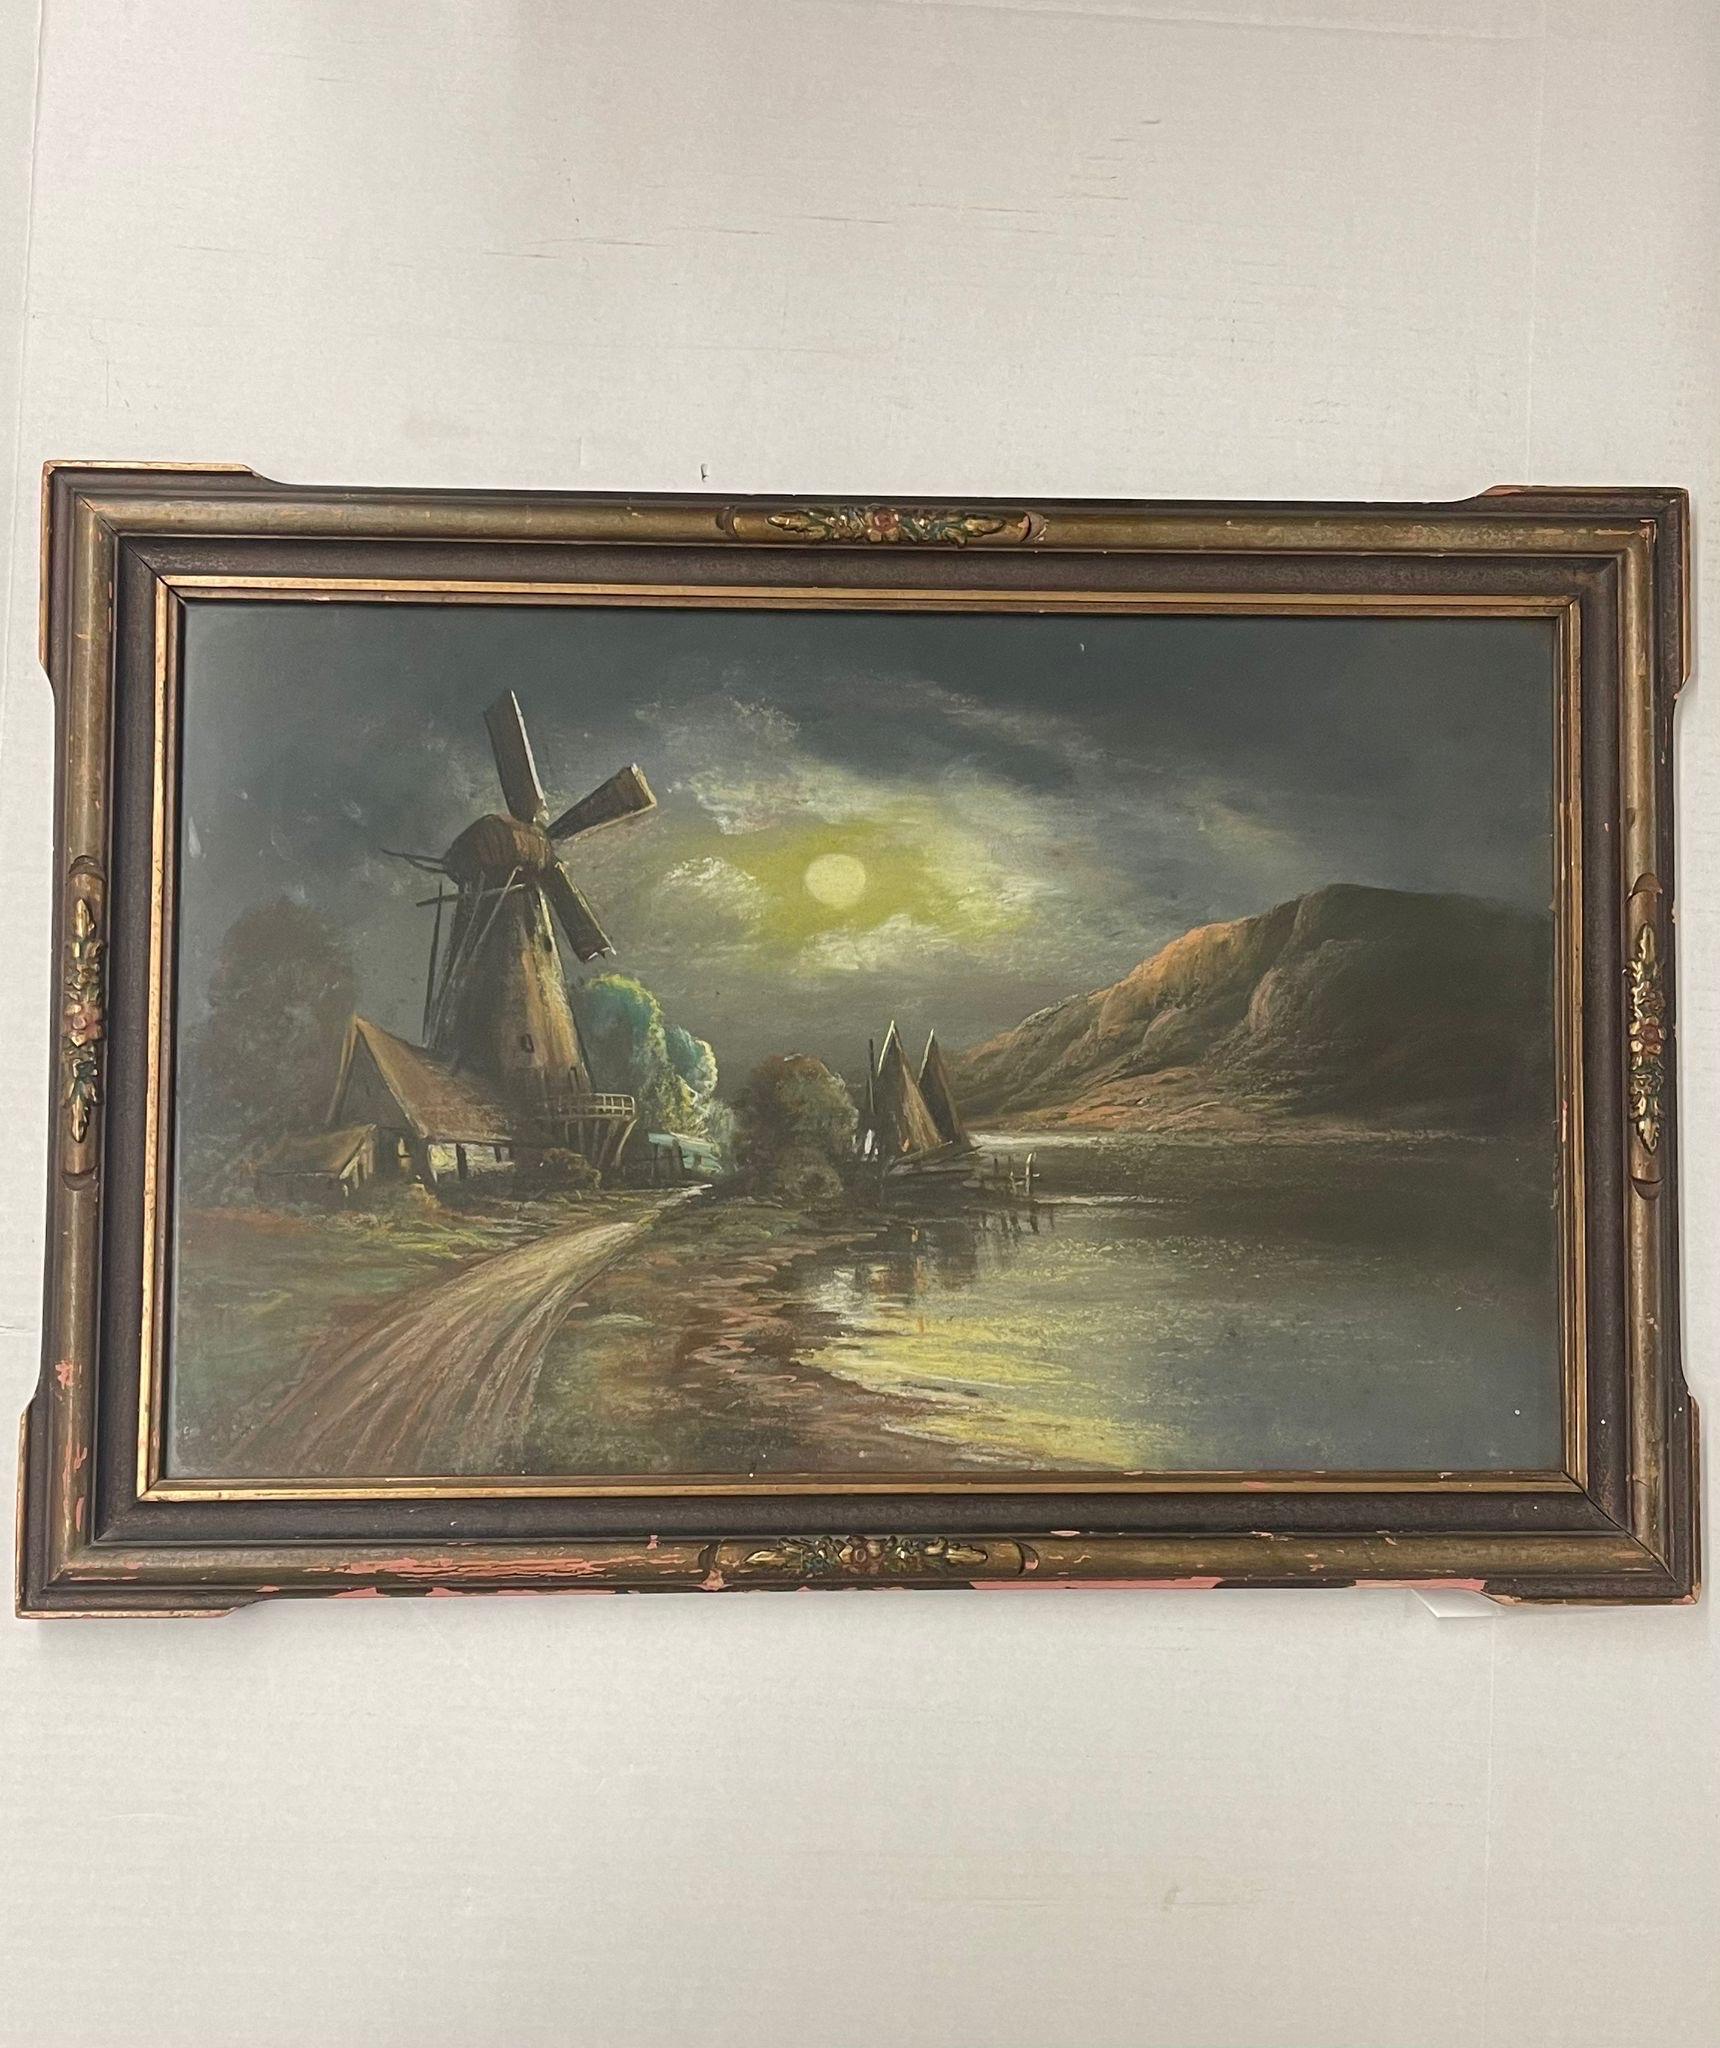 Possibly Oil or Pastel on Paper. Frame has Been Reinforced on the Back as Pictured. Frame Circa 1920s. Vintage Condition Consistent with Age as Pictured.

Dimensions. 26 W ; 1 D ; 17 1/2 H